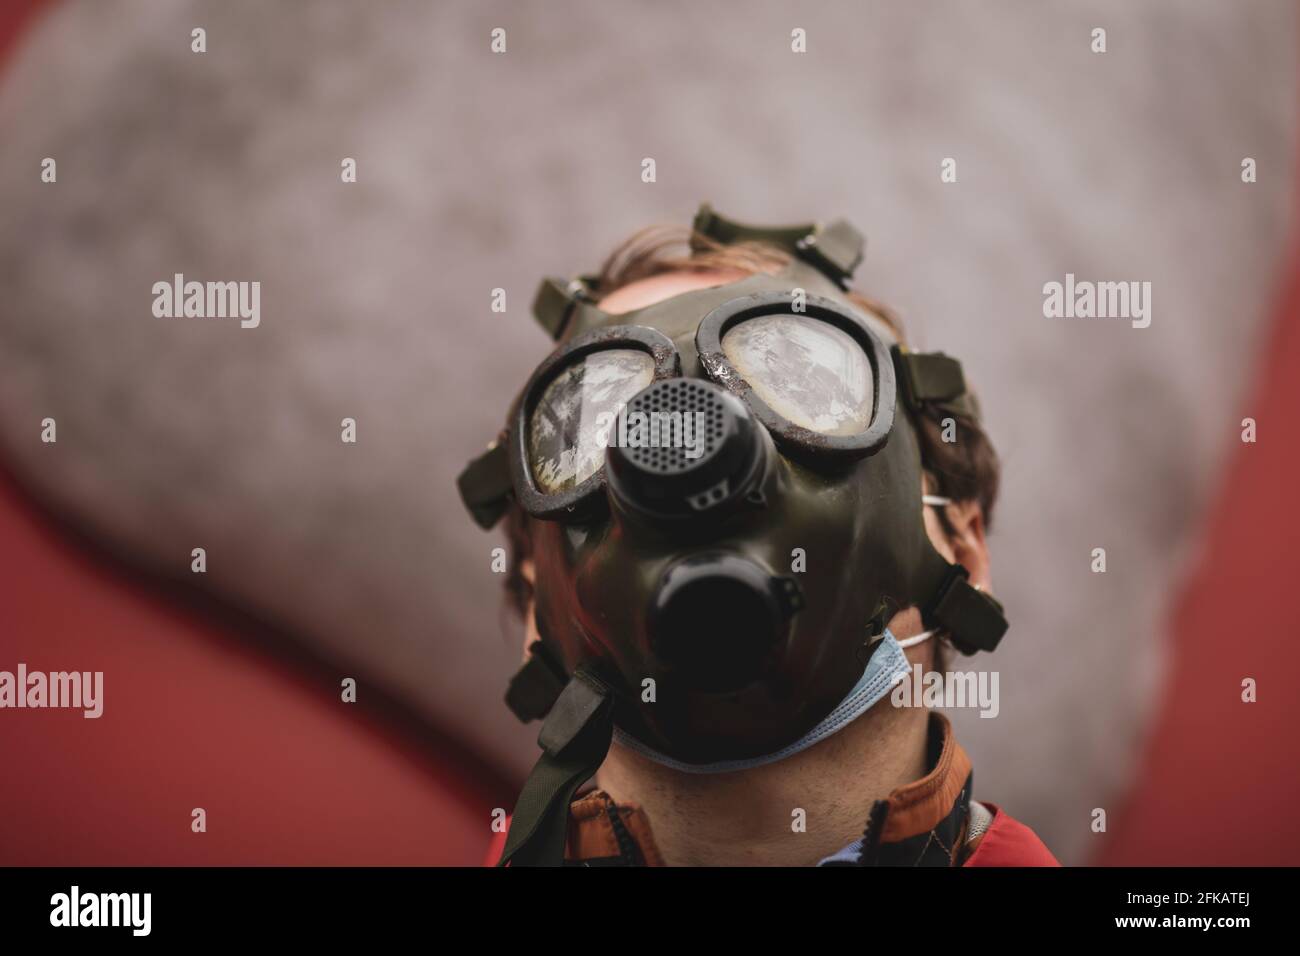 Shallow depth of field (selective focus) image with an old and worn out military gas mask without filters on the face of a man. Stock Photo